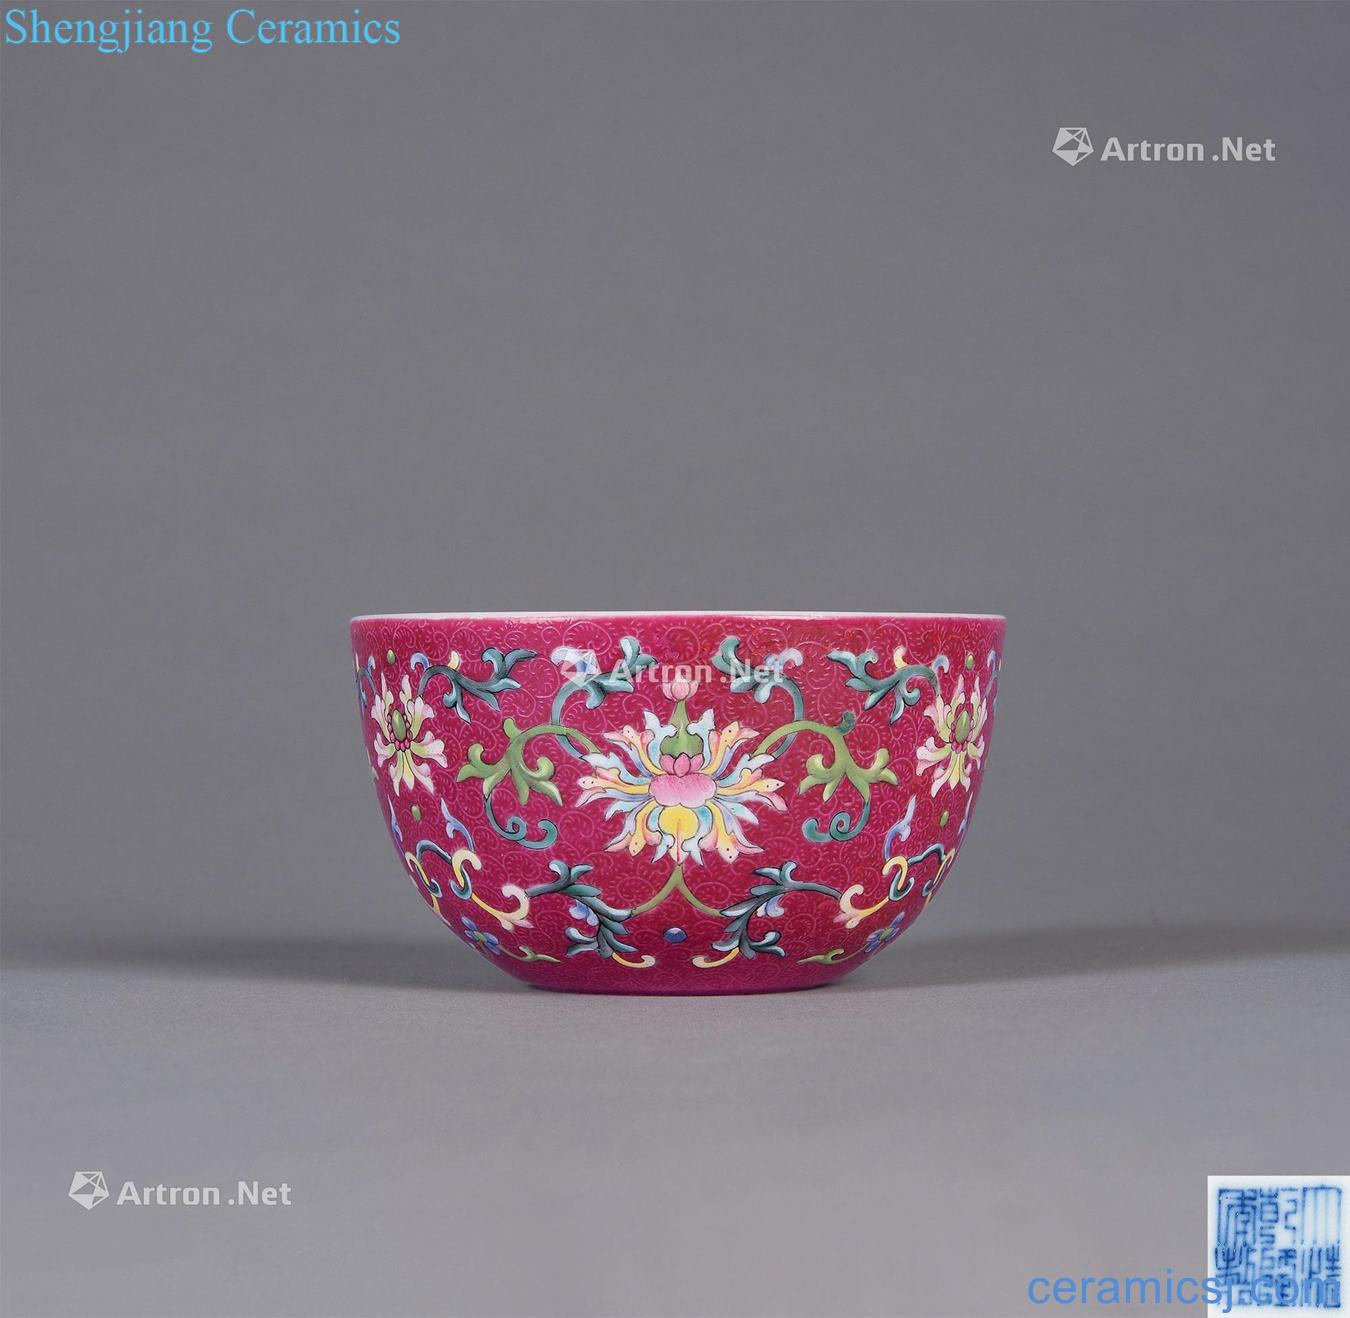 Qing qianlong imperial kiln of the colorful carmine rolling passionflower lines lie the fa cup